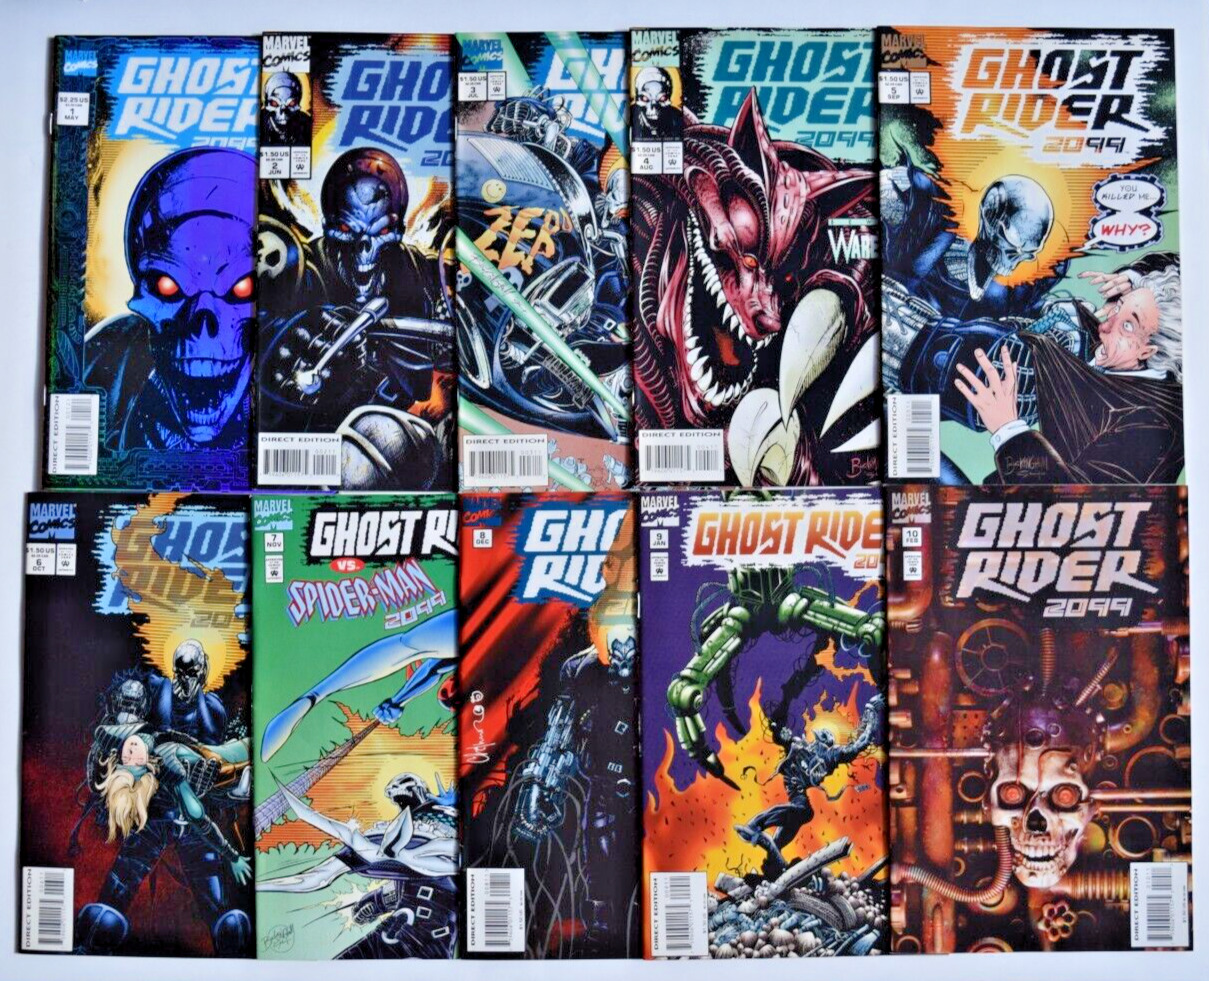 GHOST RIDER 2099 (1994) 25 ISSUE COMPLETE SET #1-25  MARVEL COMICS